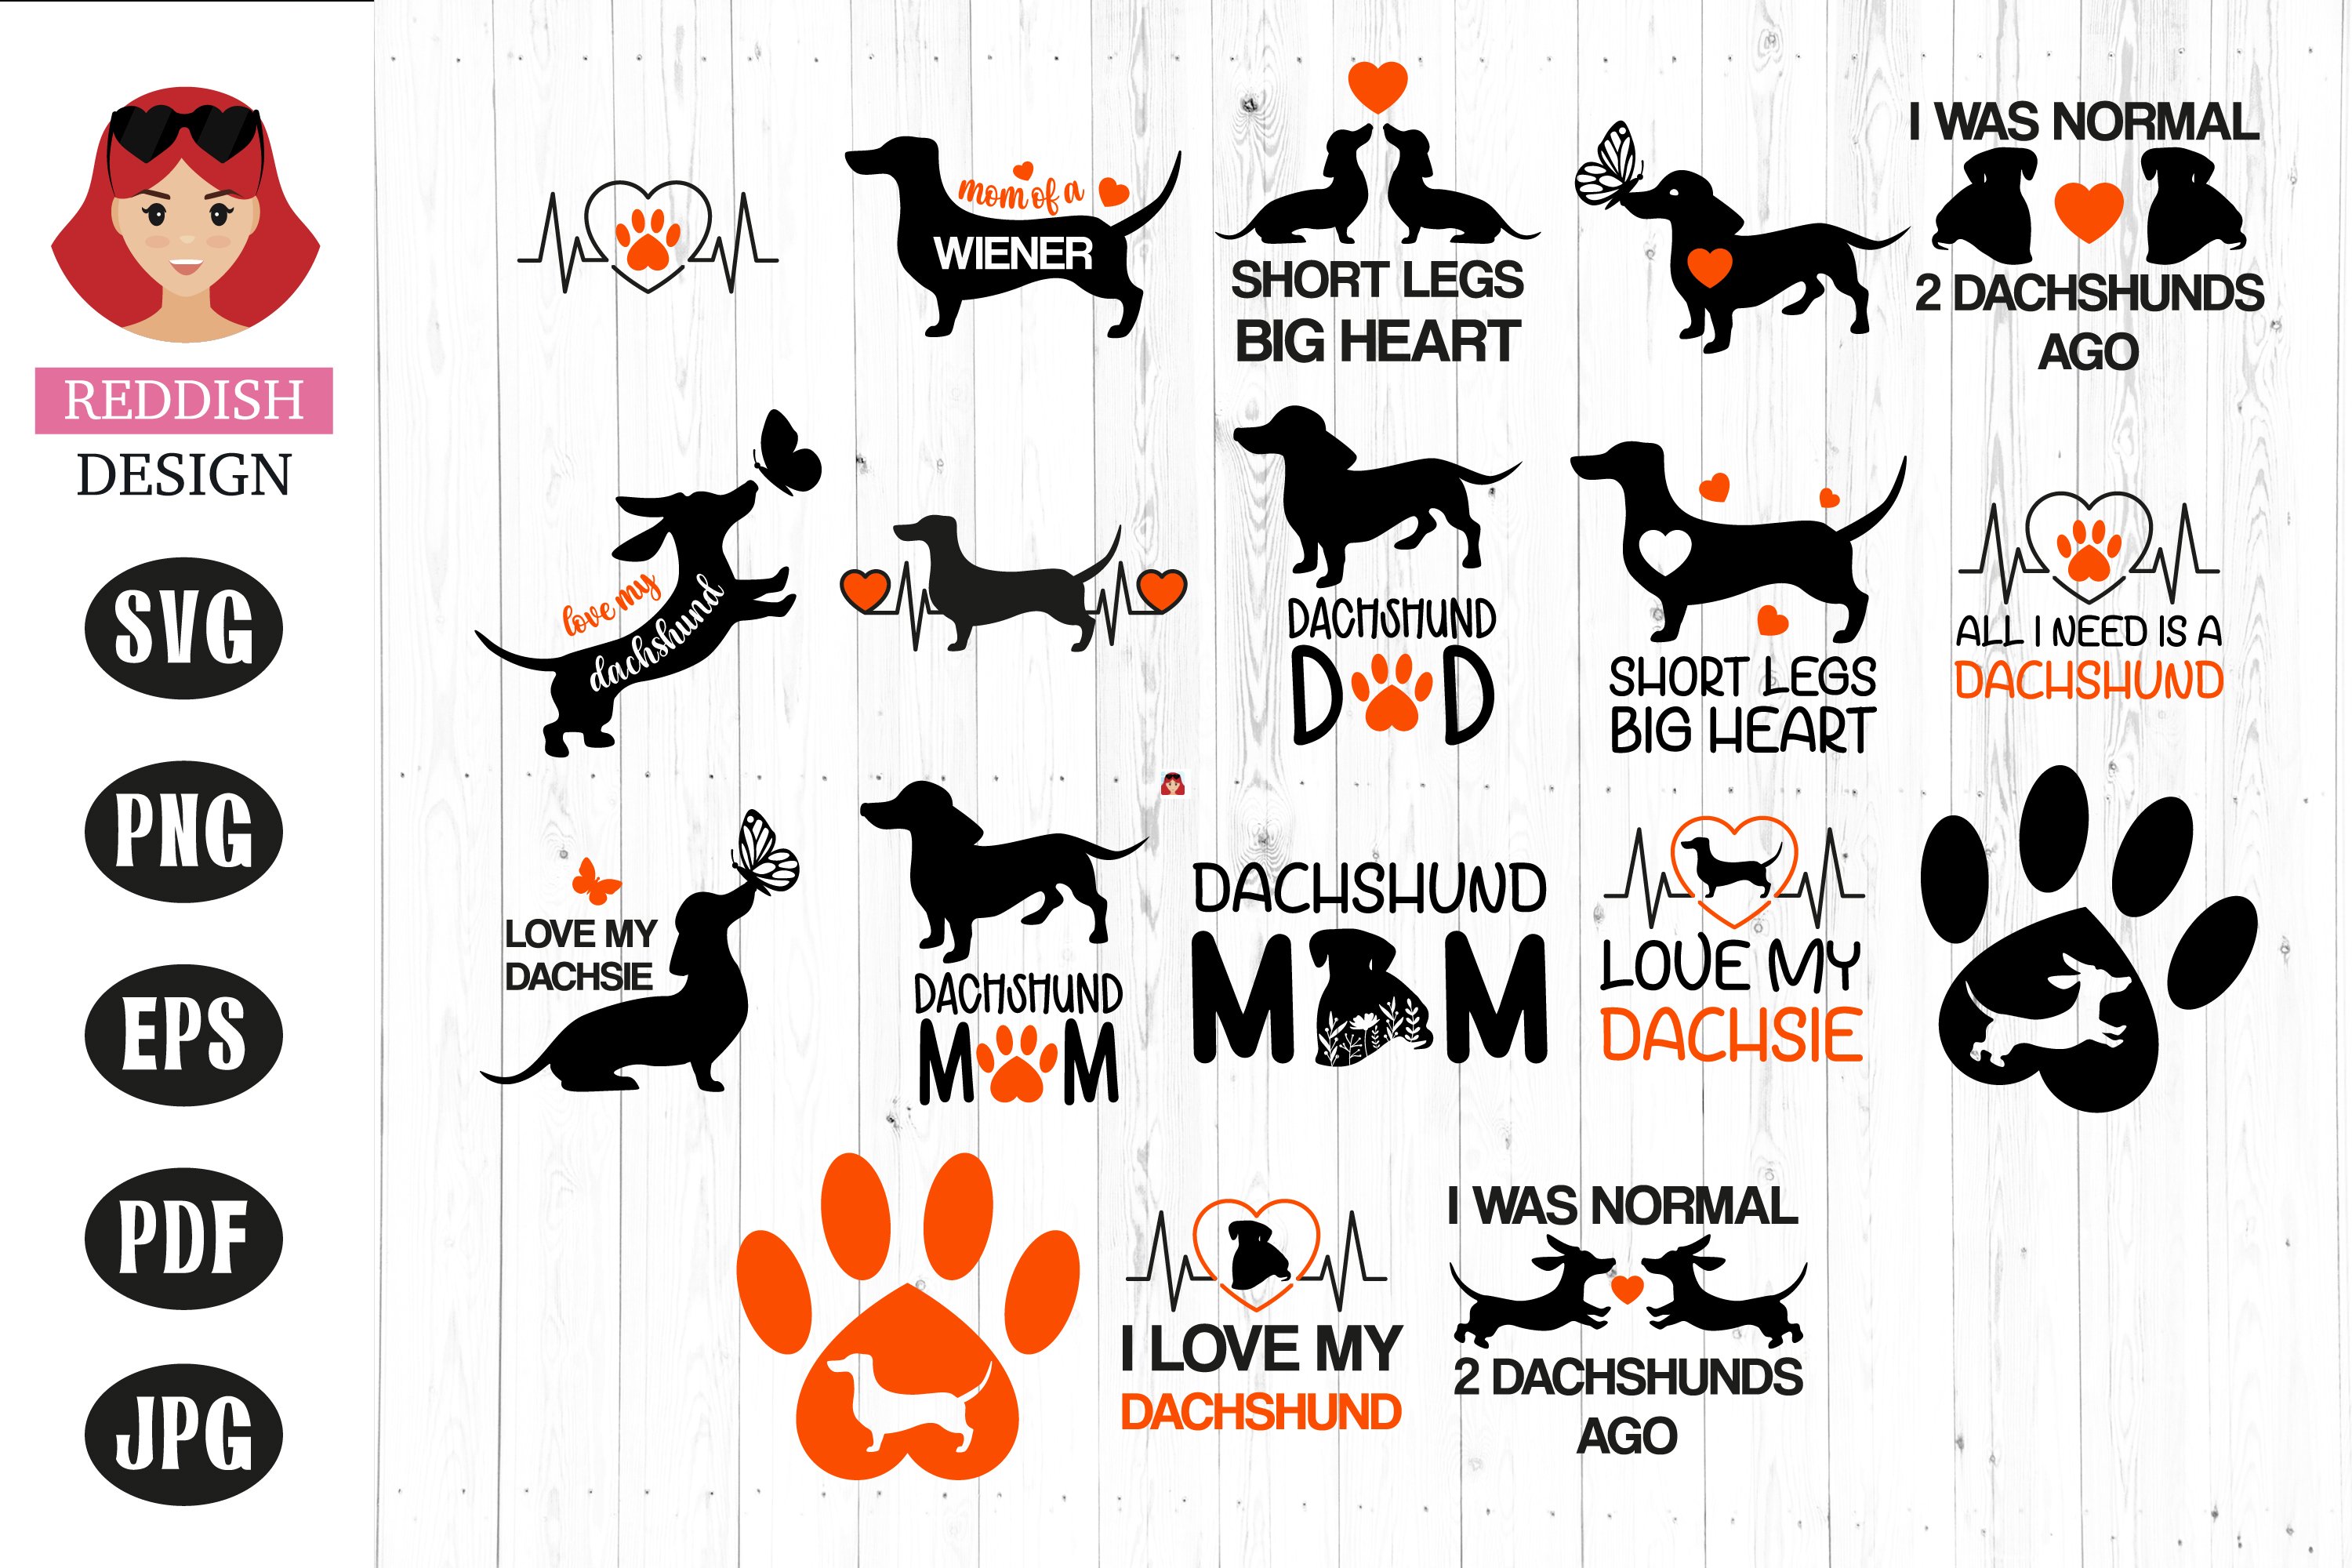 High quality phrases for dog lovers.